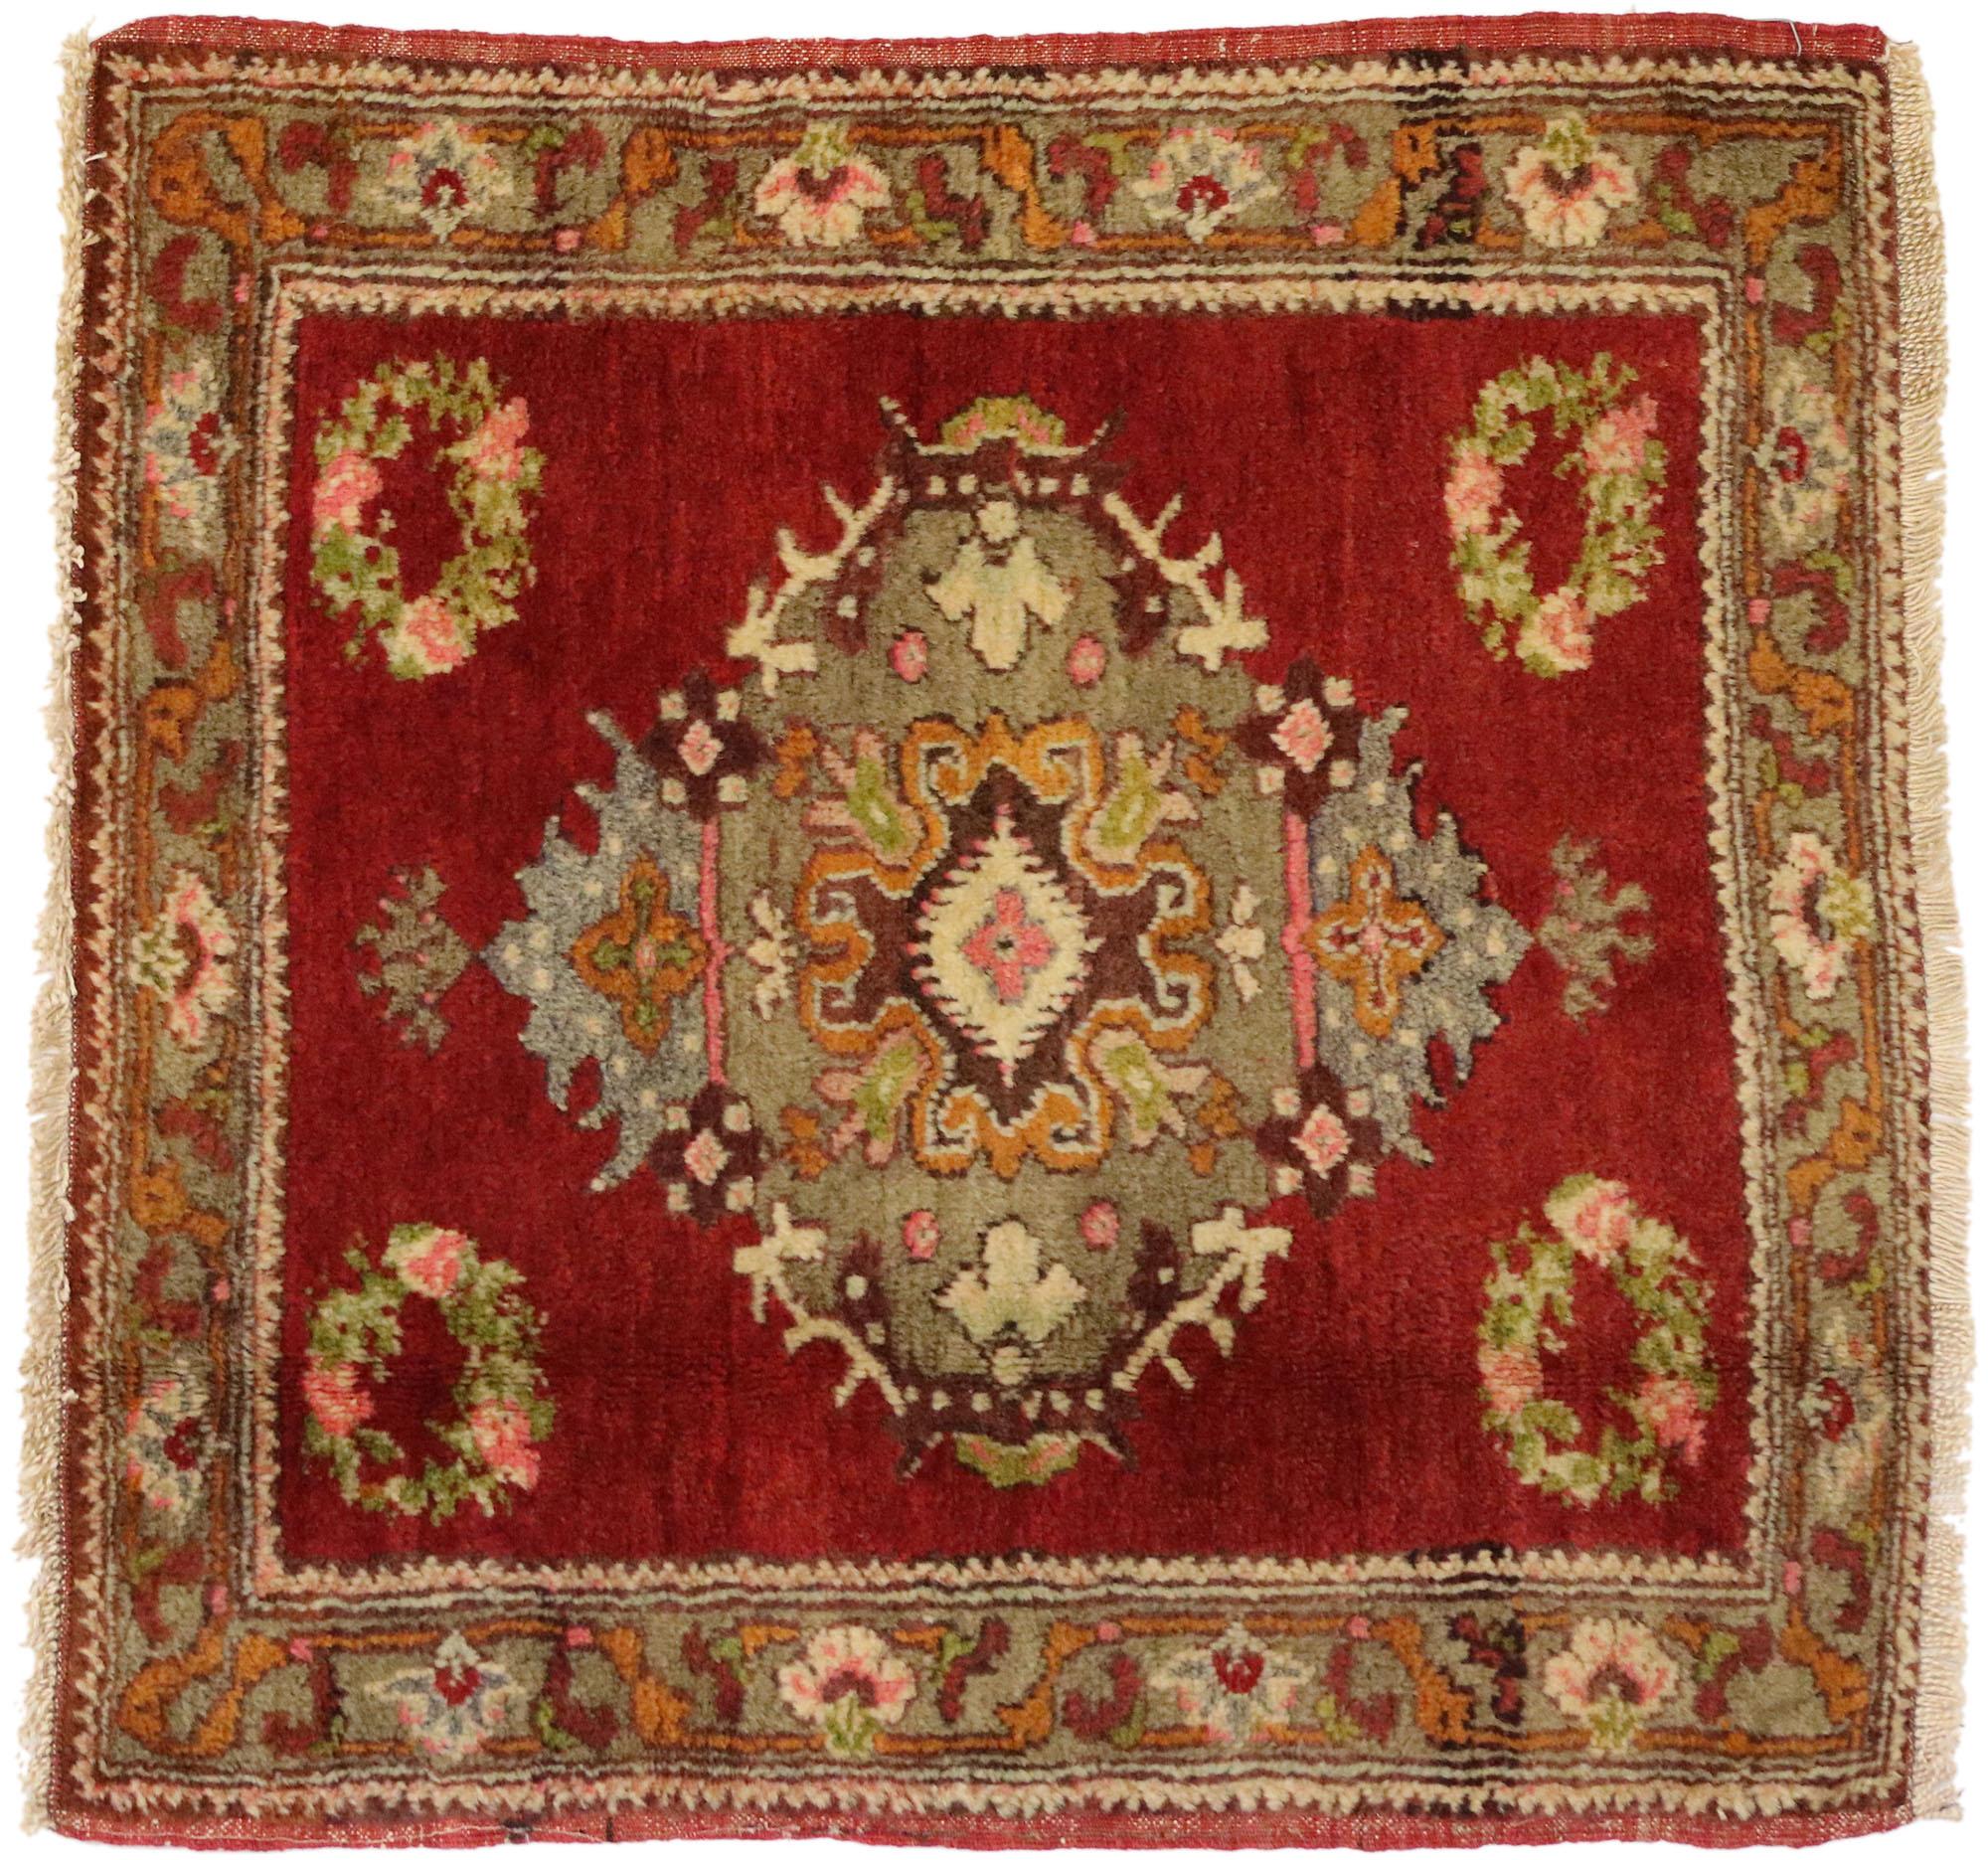 51415 Vintage Turkish Oushak Yastik Scatter Rug, Small Square Accent Rug 02'04 x 02'04. This hand knotted wool vintage Turkish Oushak Yastik scatter rug features a central lozenge medallion patterned with a geometric botanical scene floating in an